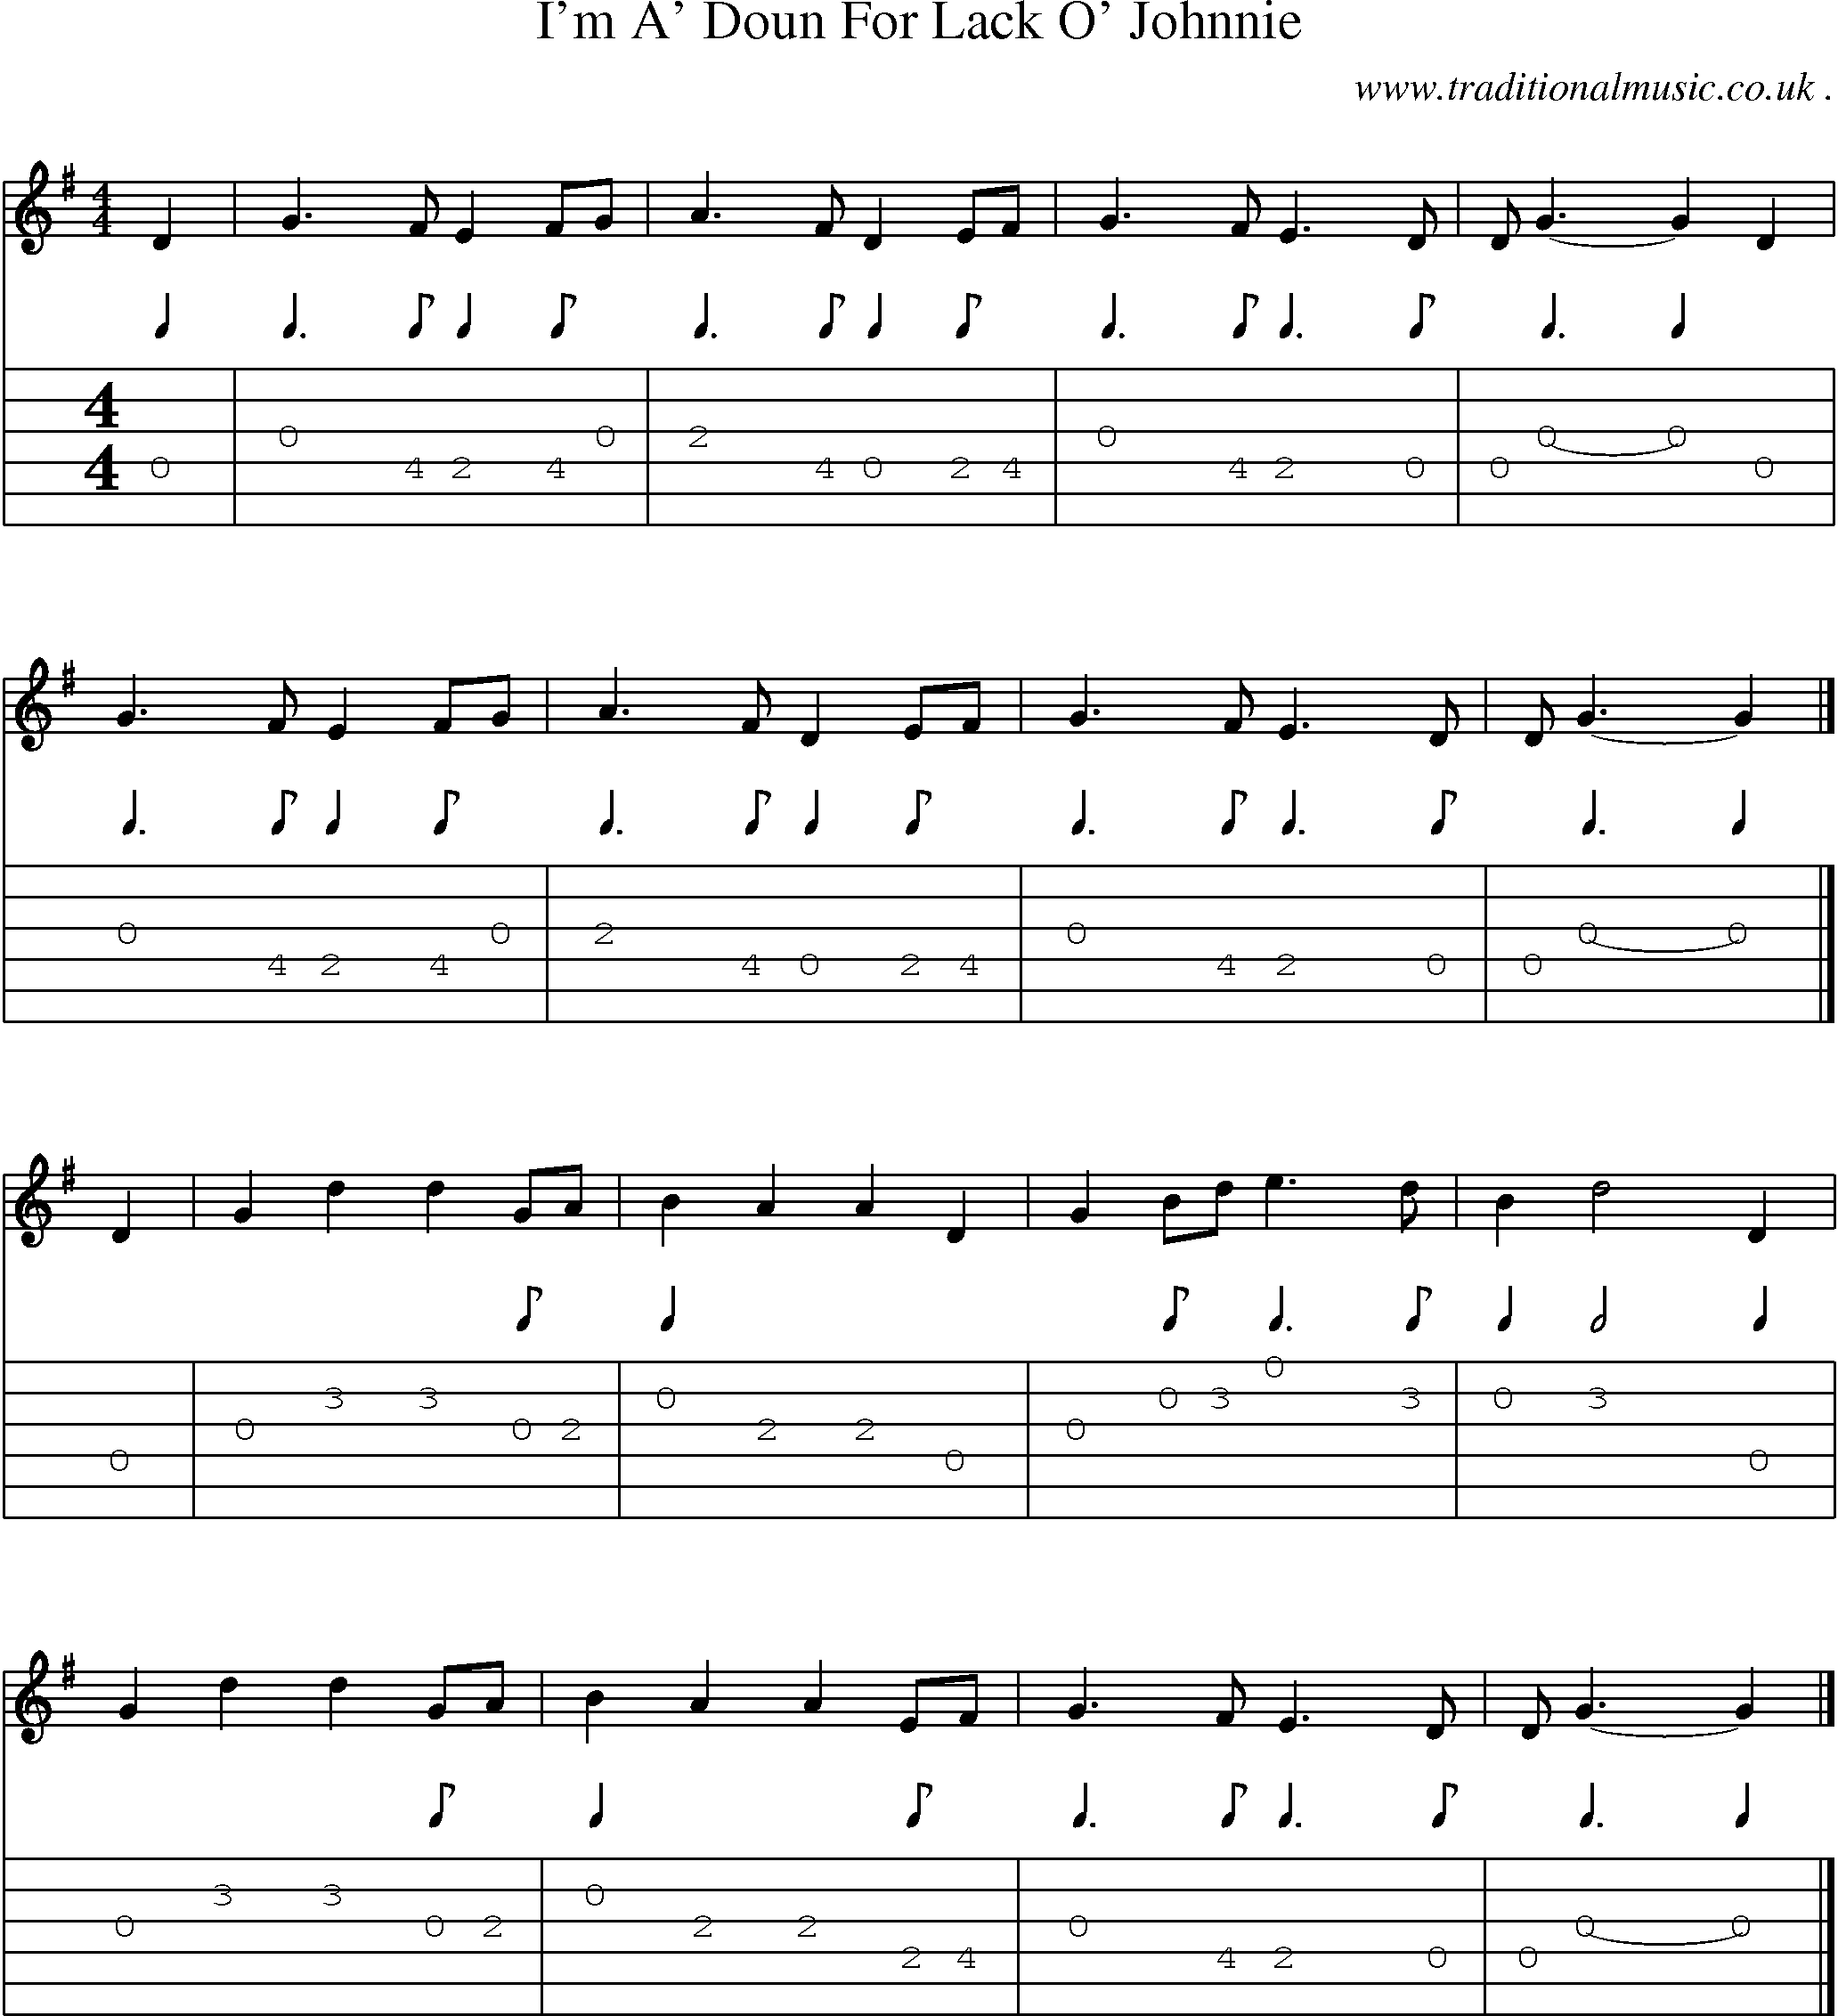 Sheet-music  score, Chords and Guitar Tabs for Im A Doun For Lack O Johnnie